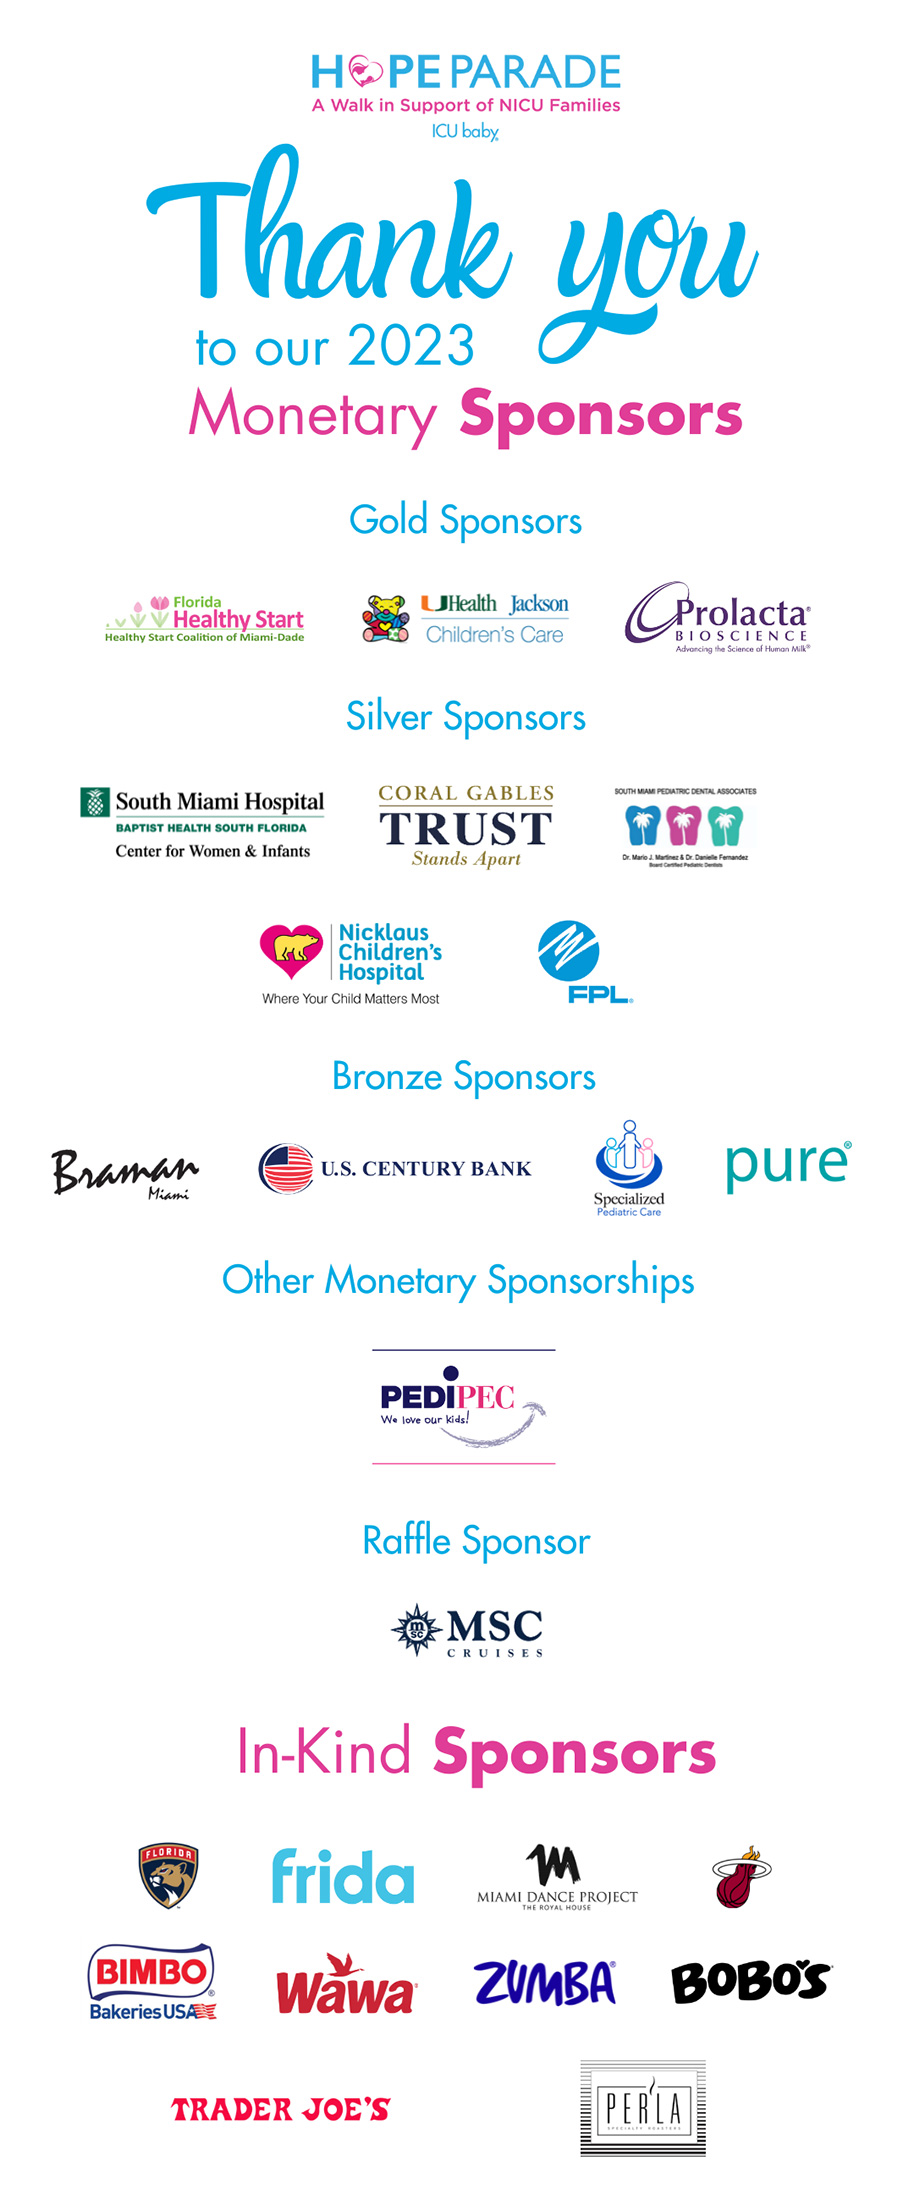 Thank you to our 2023 Monetary Sponsors